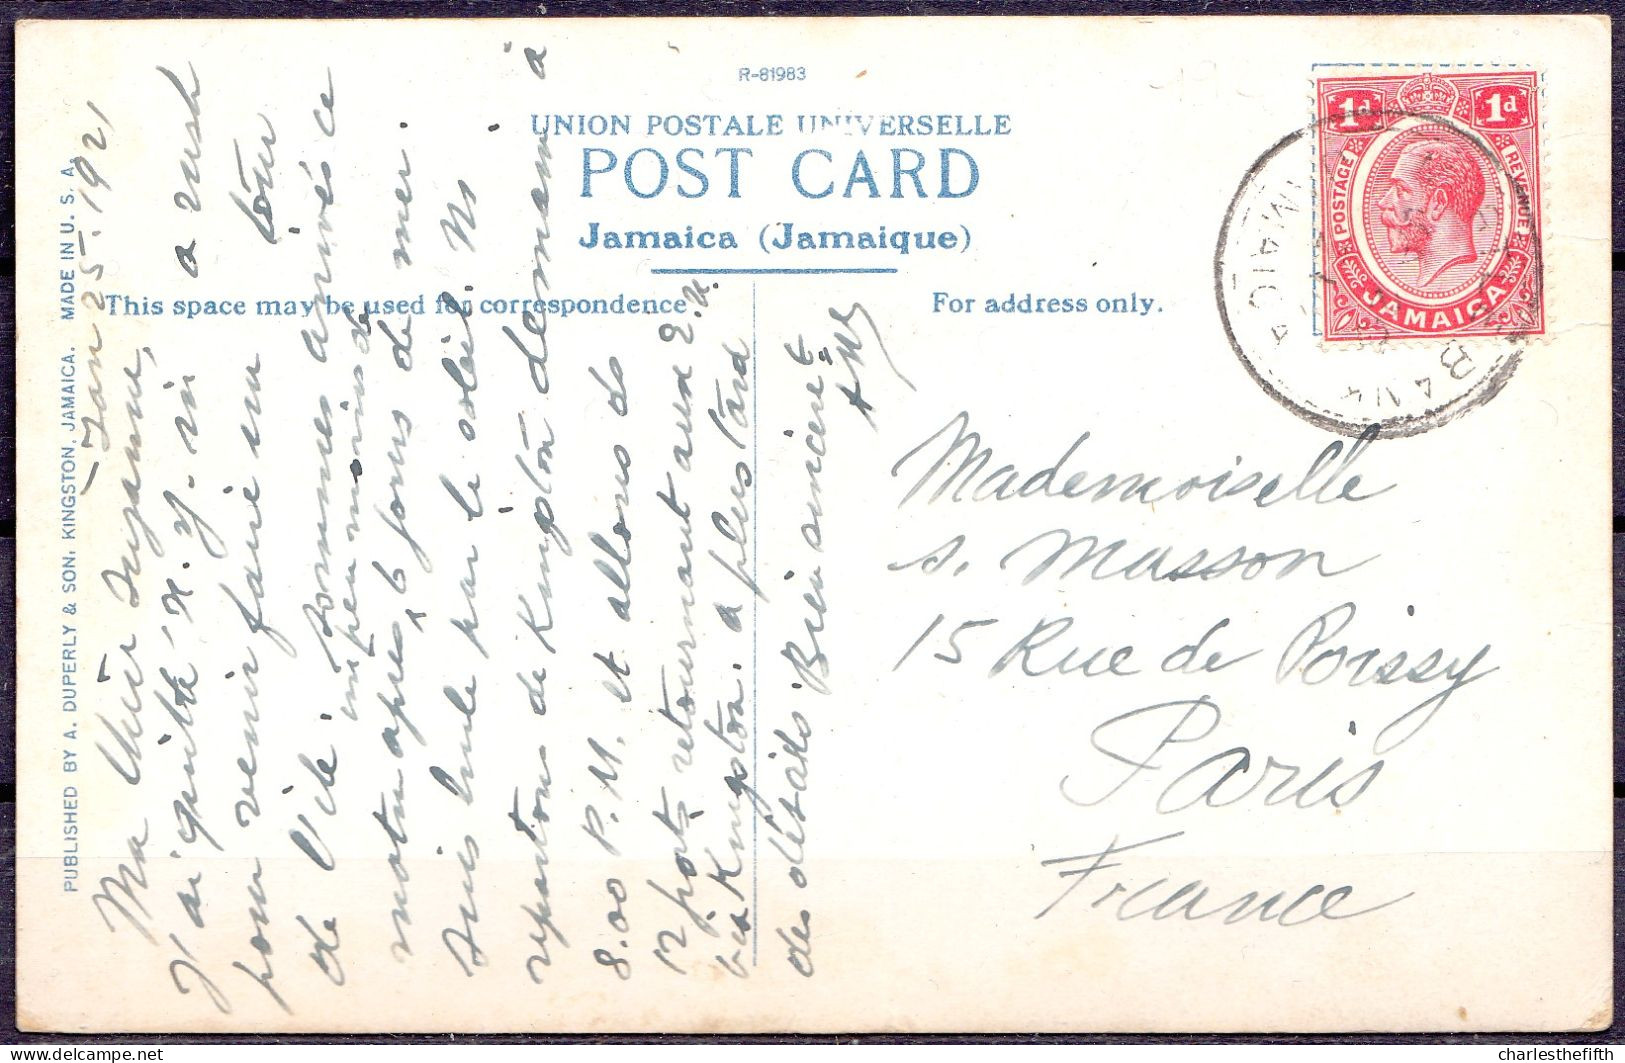 GREETINGS FROM JAMAICA 1921 ( = British West Indies - See Stamp ) - KING STREET KINGSTON - PUBLIC BUILDING - Giamaica